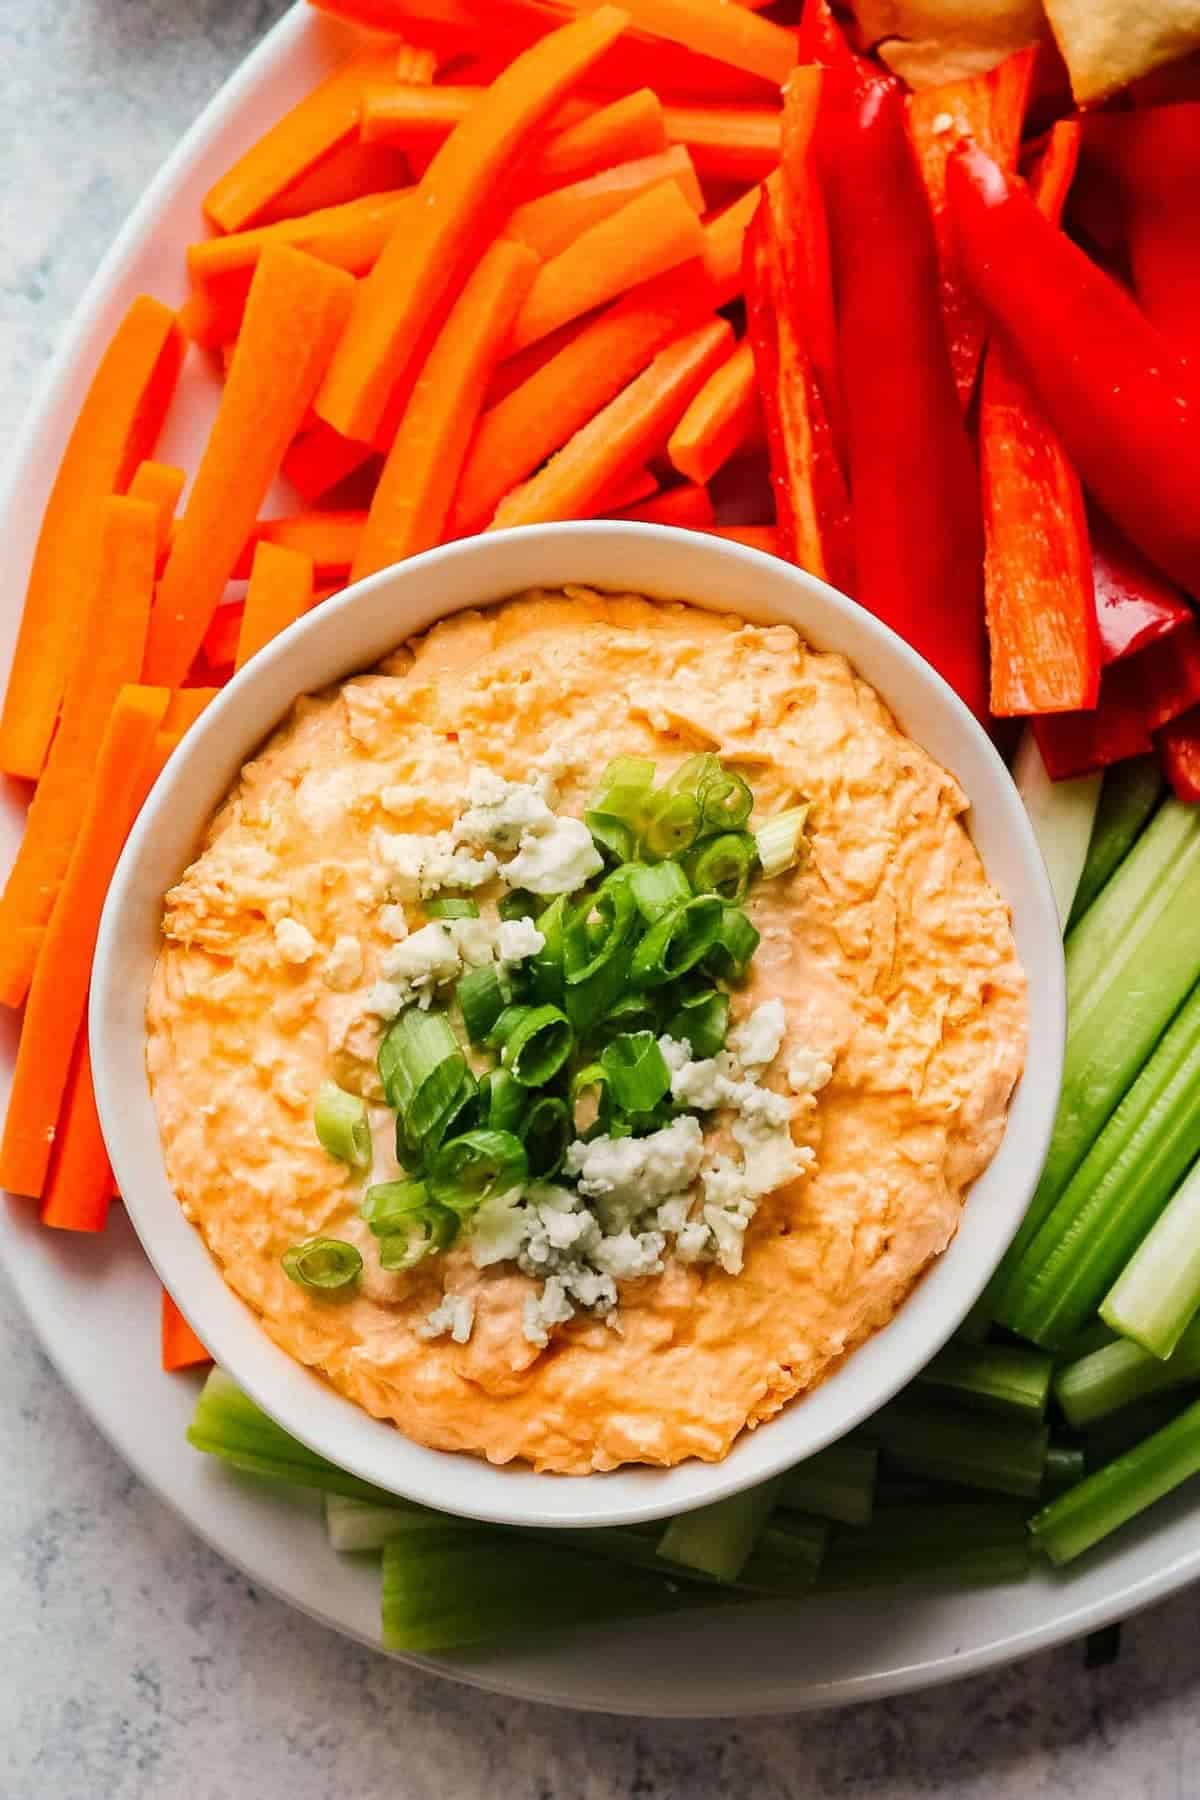 Buffalo Chicken dip with blue cheese served with a platter of vegetables